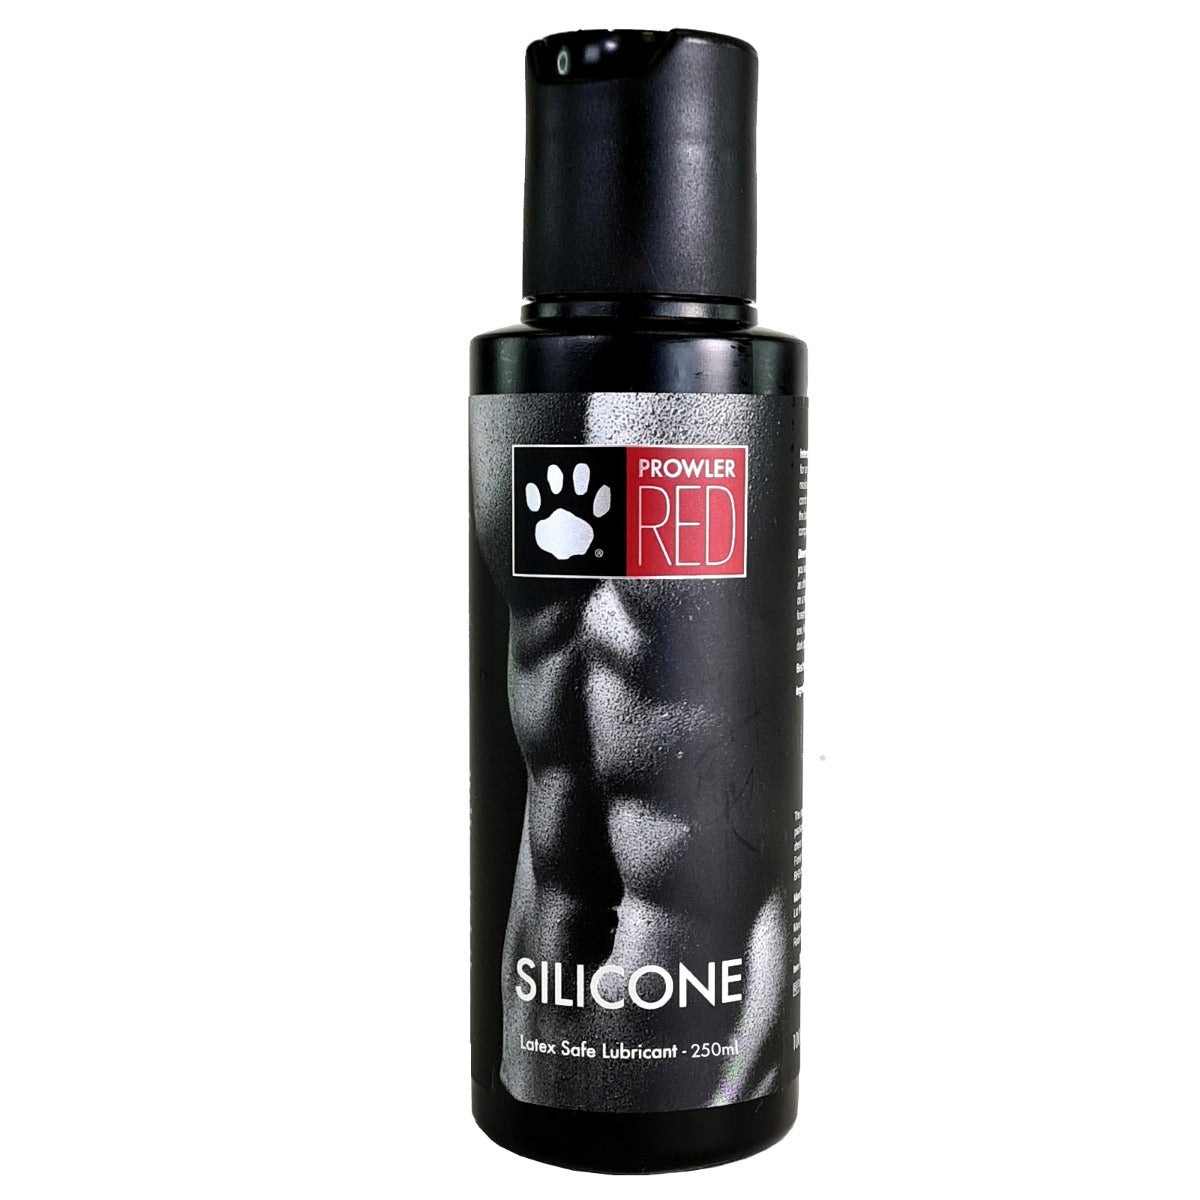 Silicone Based Lube Prowler RED Silicone Based Lube 250ml   